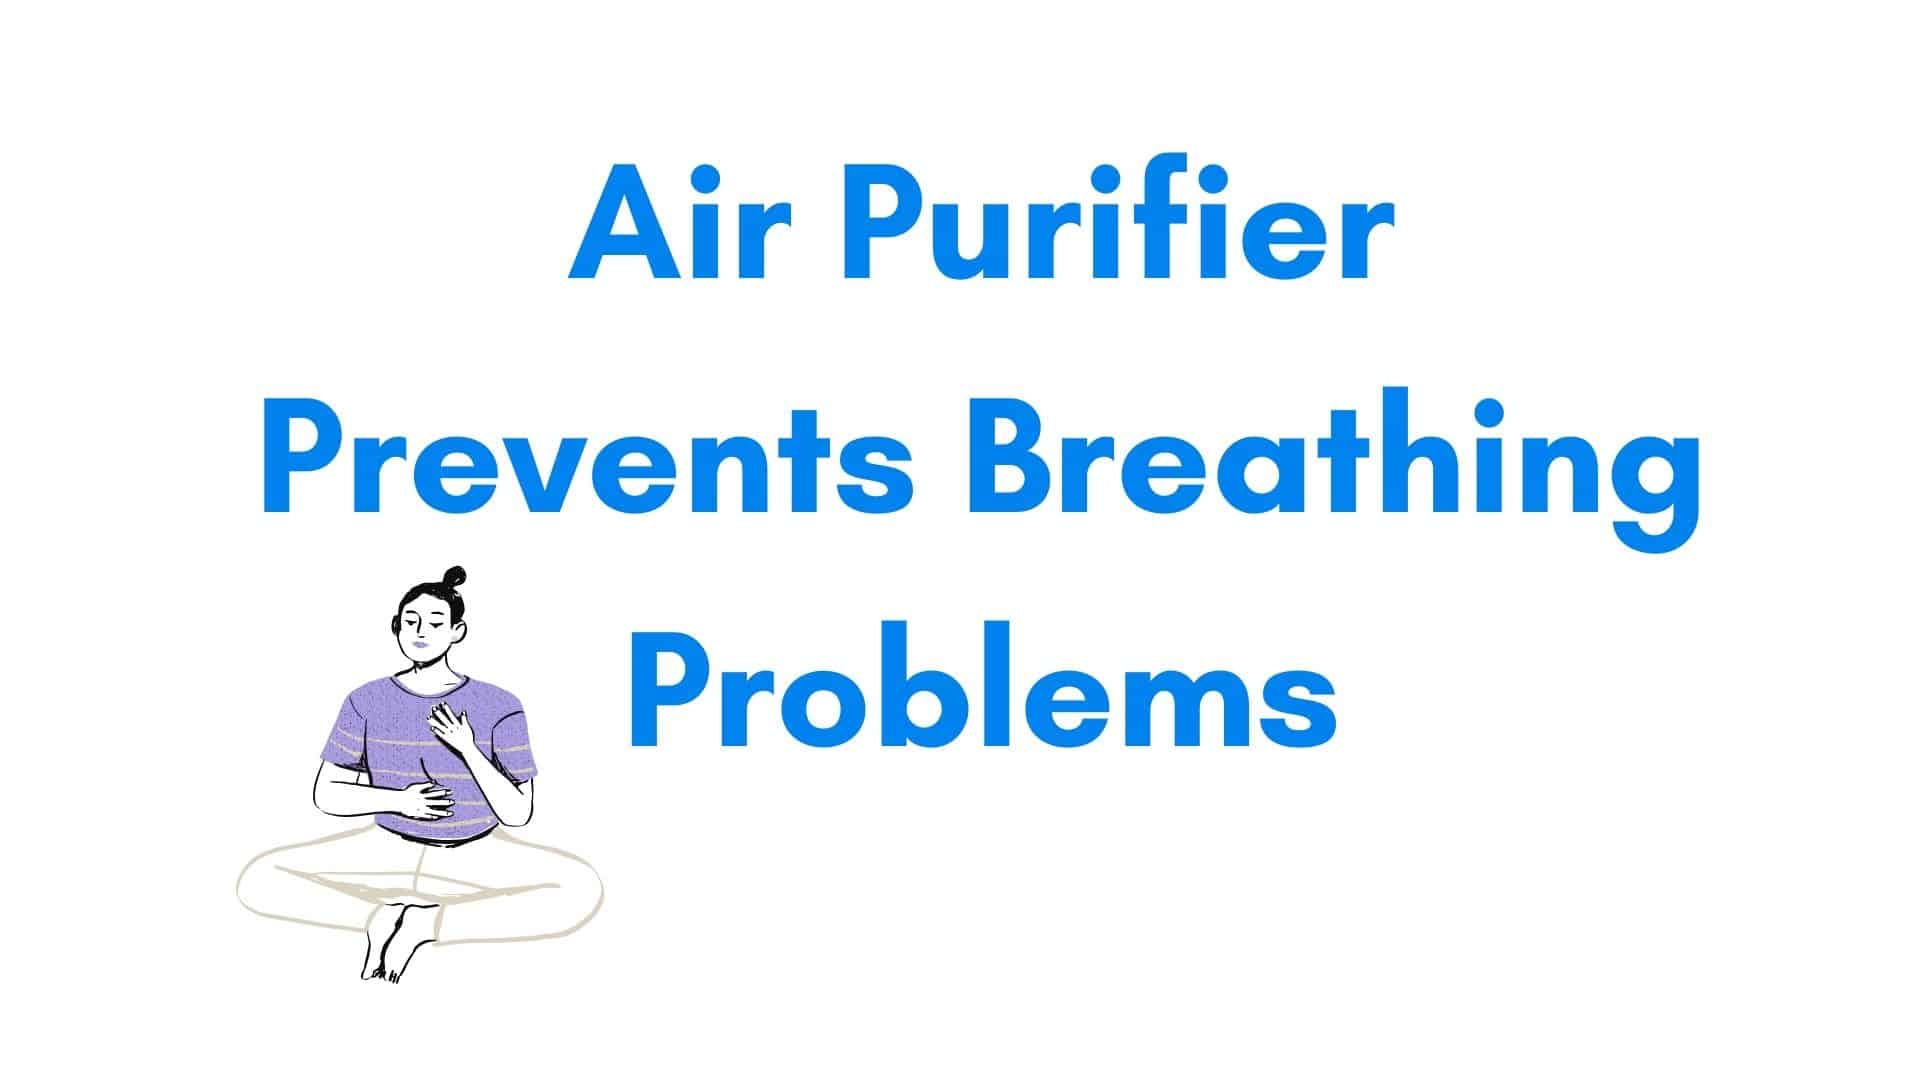 Air Purifier Prevents Breathing Problems